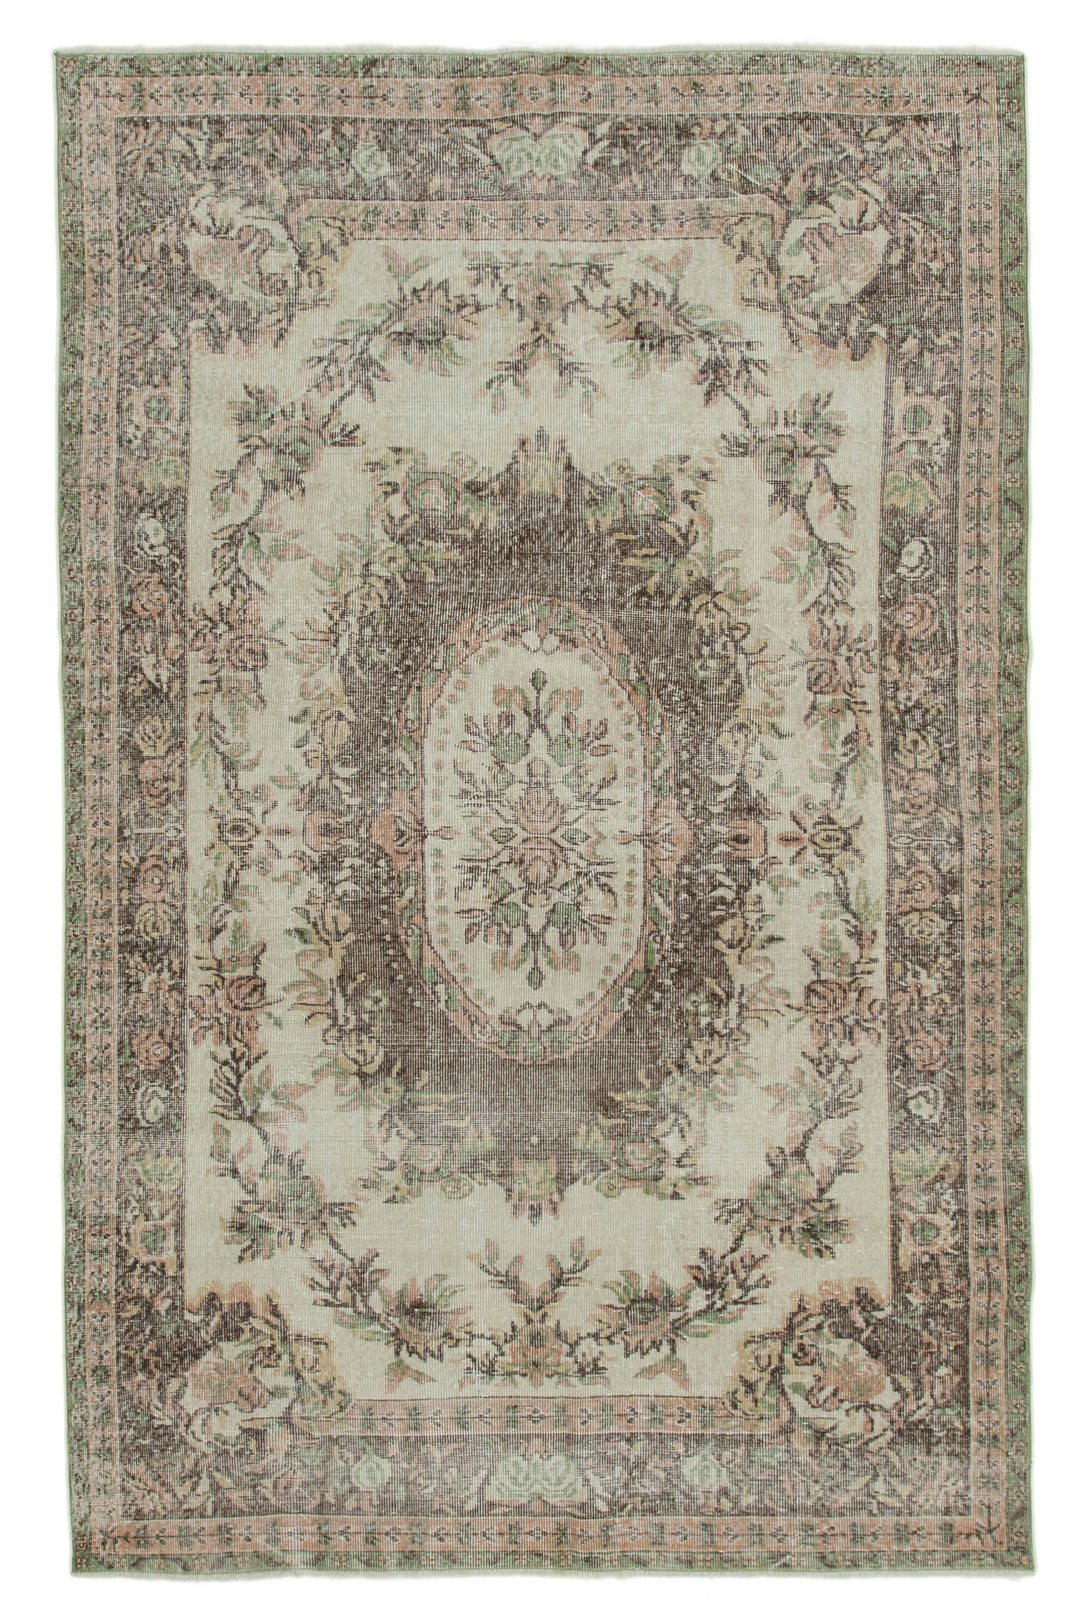 Handmade White Wash Area Rug > Design# OL-AC-36396 > Size: 6'-4" x 10'-0", Carpet Culture Rugs, Handmade Rugs, NYC Rugs, New Rugs, Shop Rugs, Rug Store, Outlet Rugs, SoHo Rugs, Rugs in USA